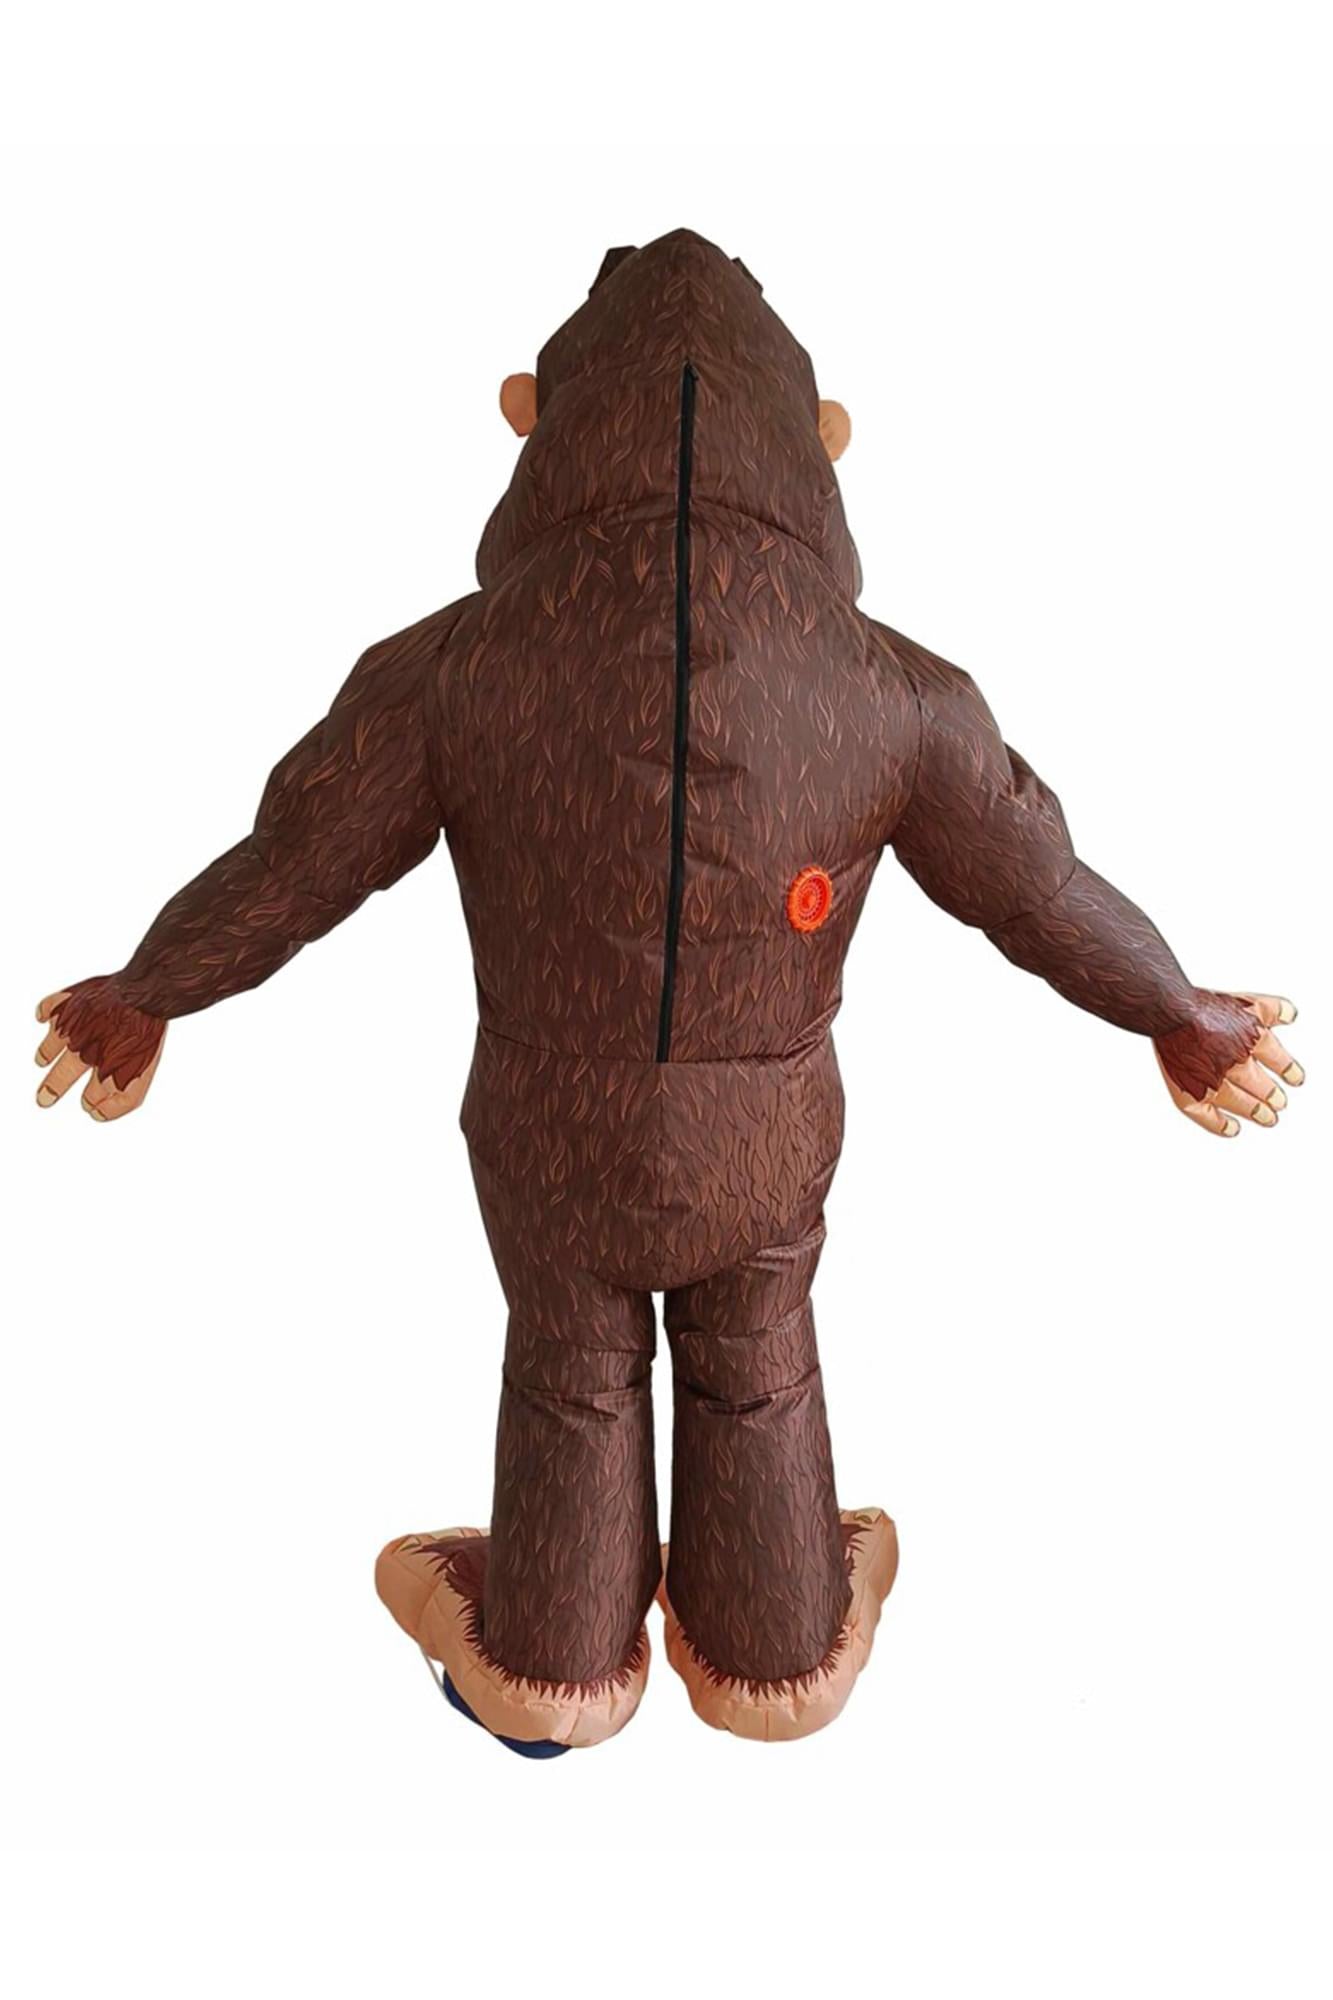 Big Foot Adult Inflatable Costume | One Size